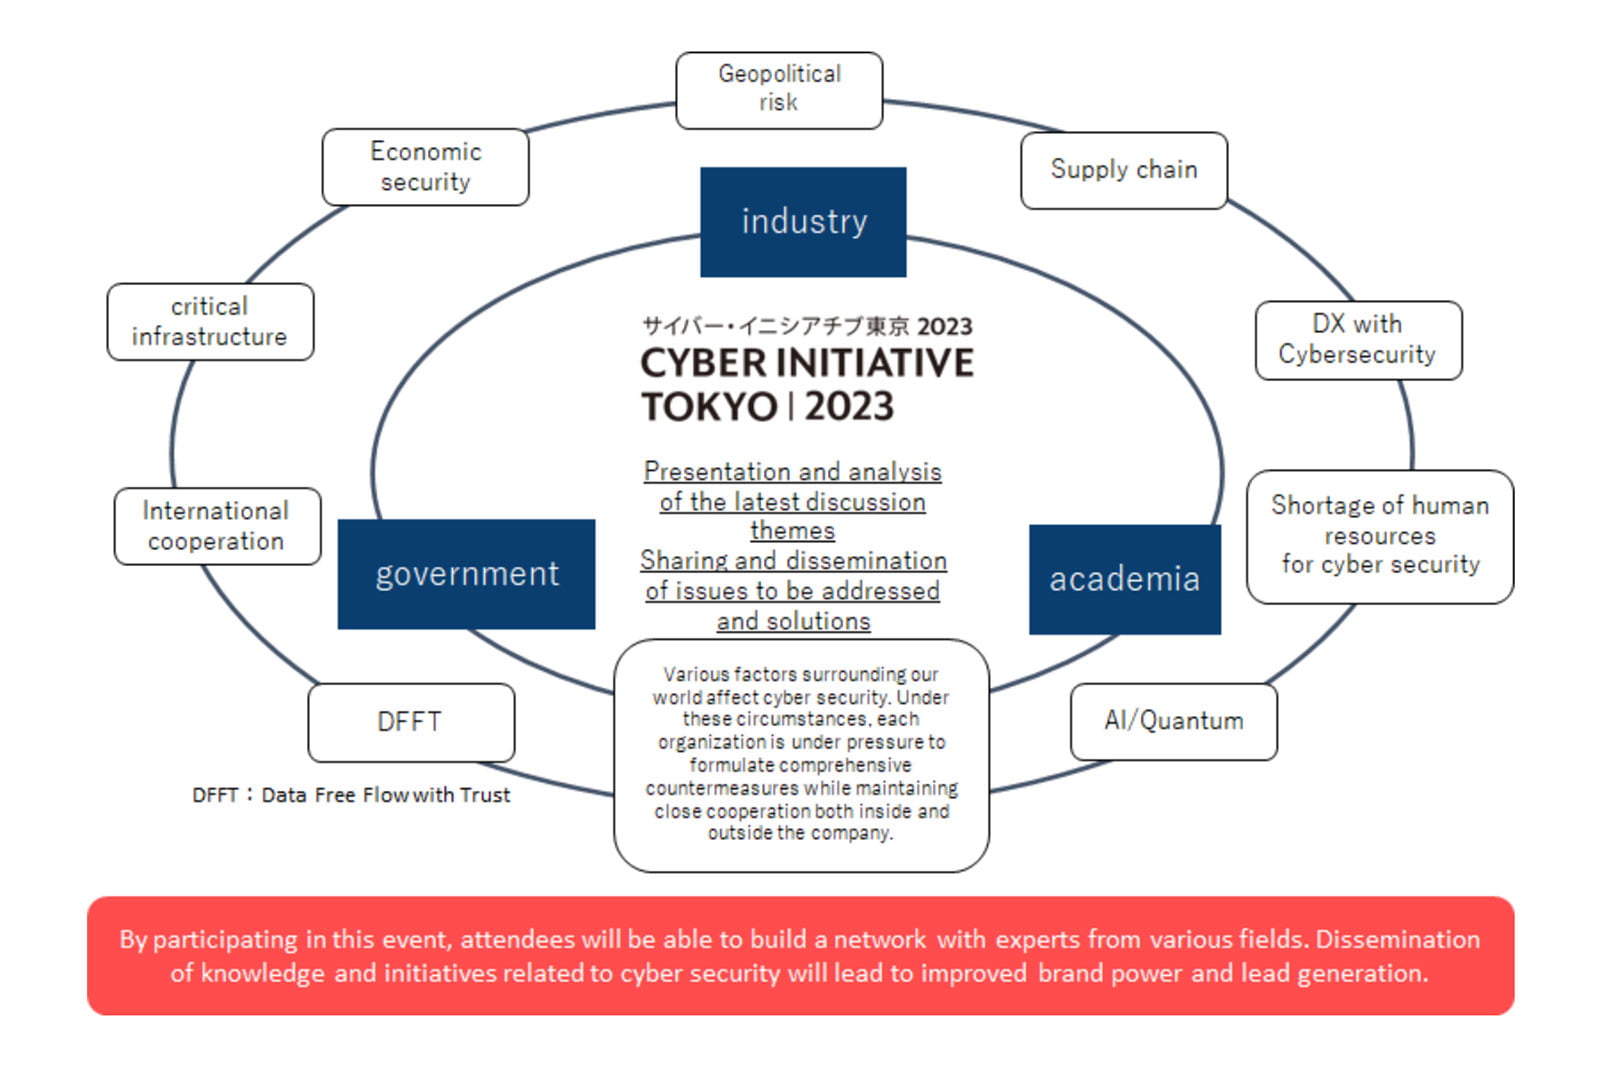 Cyber Initiative Tokyo will bring together experts from various fields from Japan and overseas